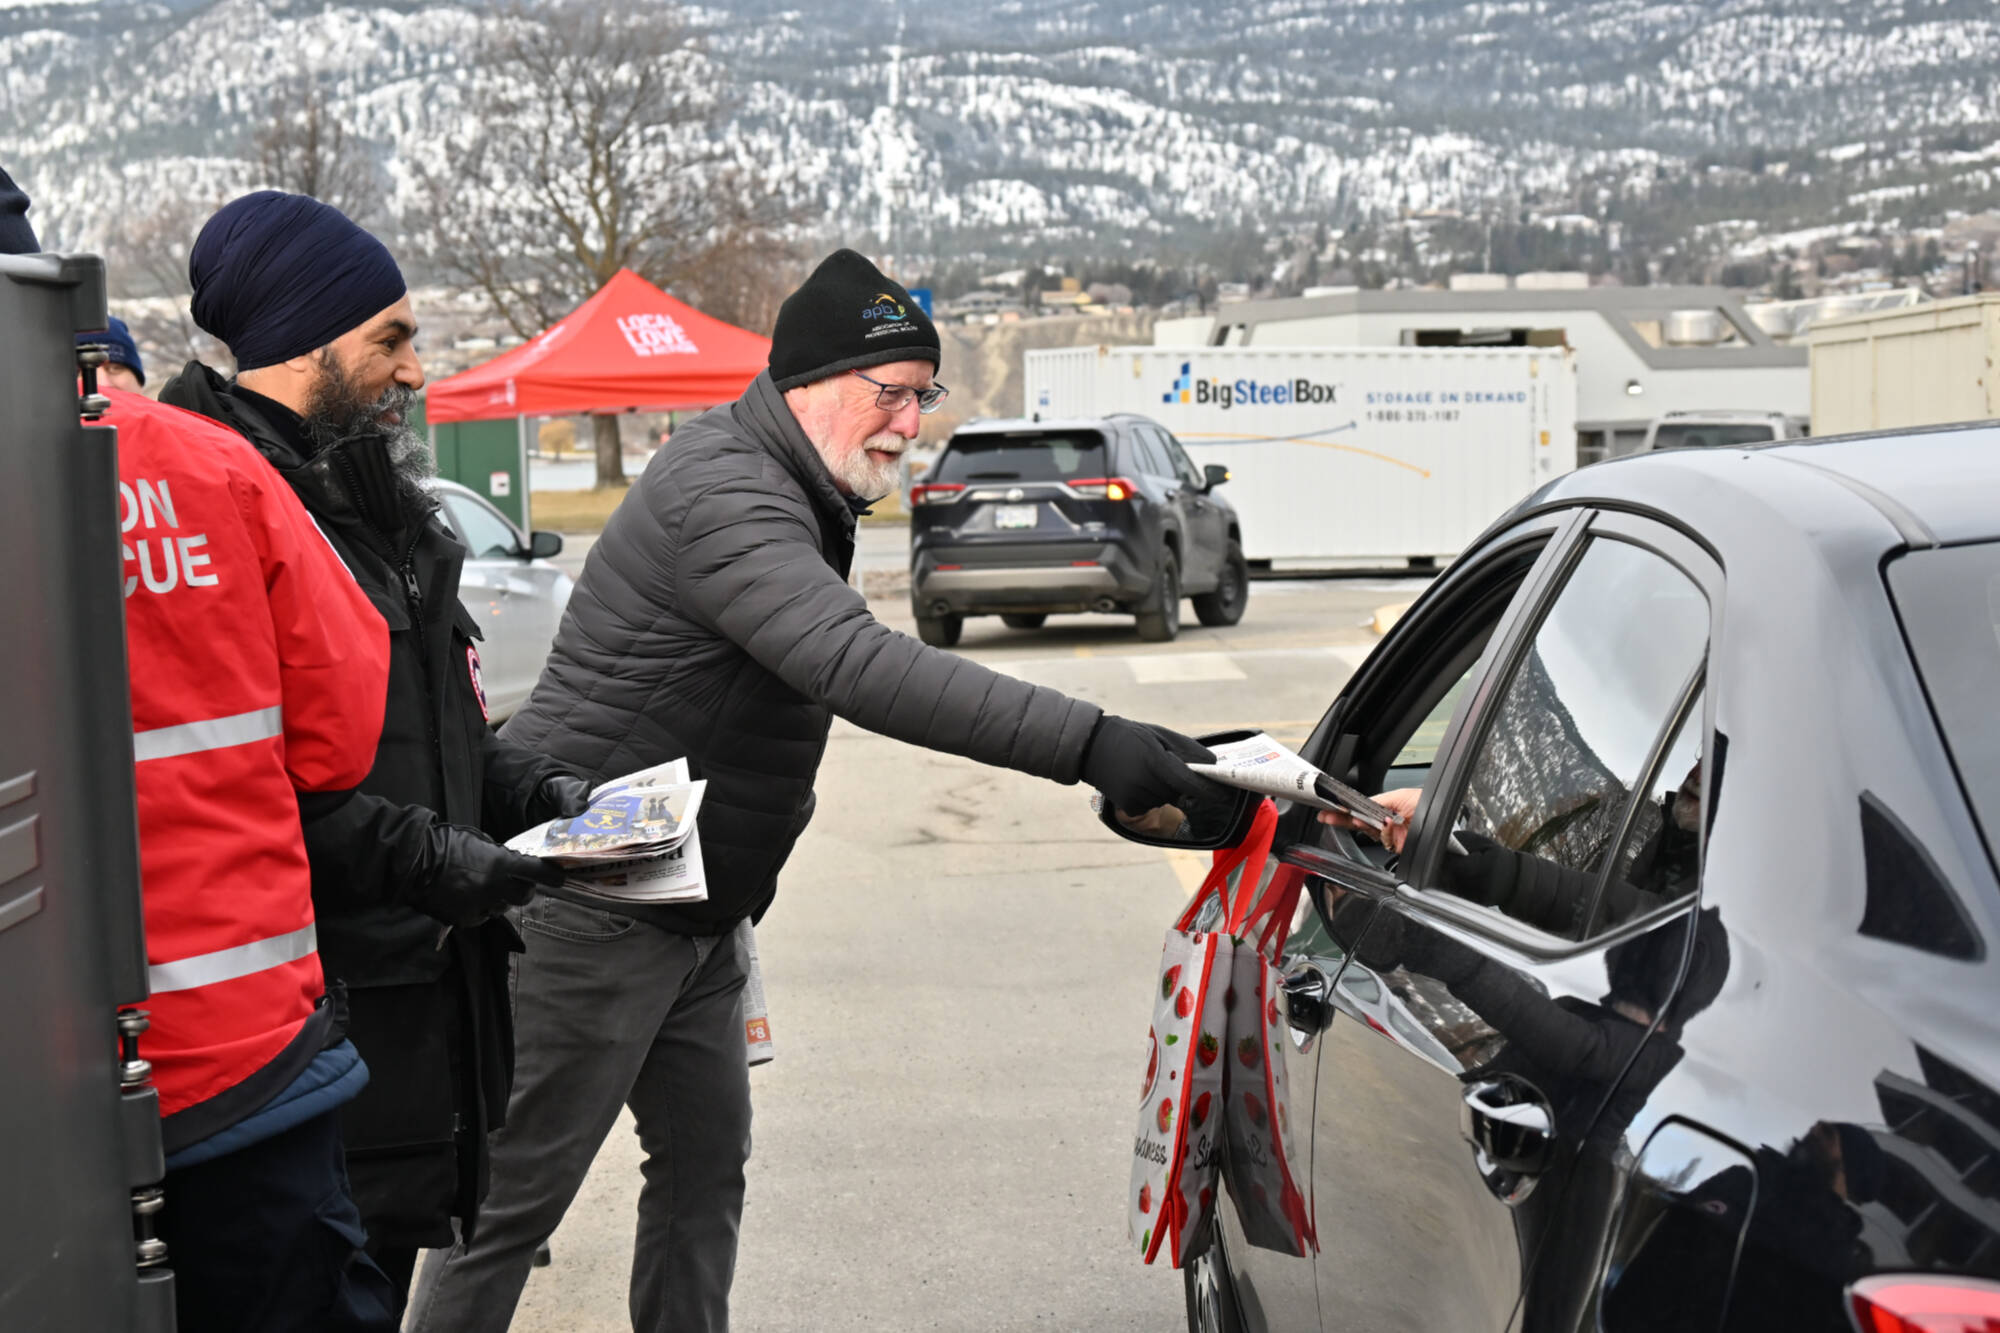 NDP Leader Jagmeet Singh joined MP Richard Cannings at the United Way's annual fundraiser on March 2. (Brennan Phillips - Western News)